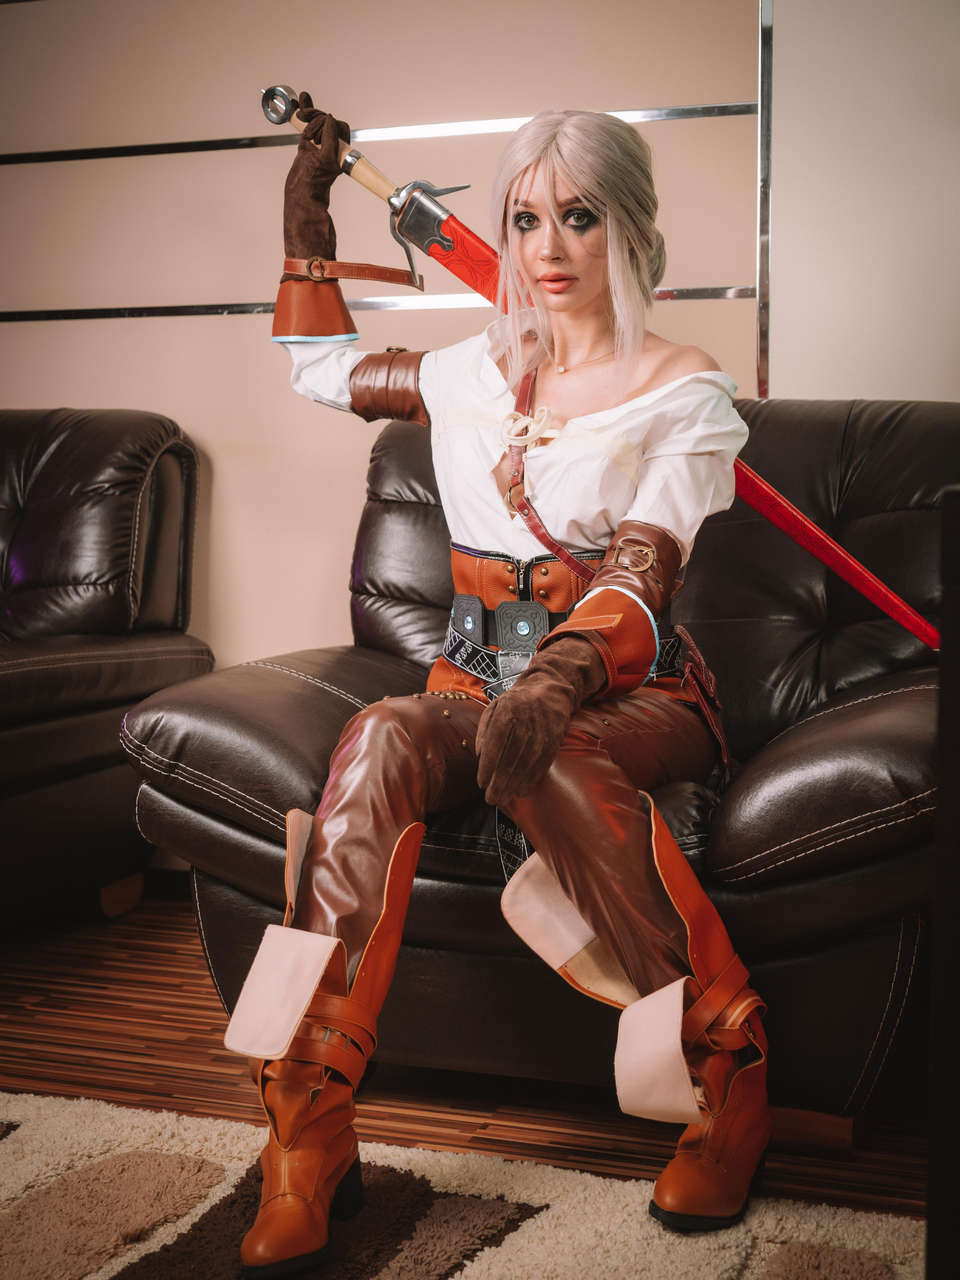 Ciri From The Witcher By Purple Bitch